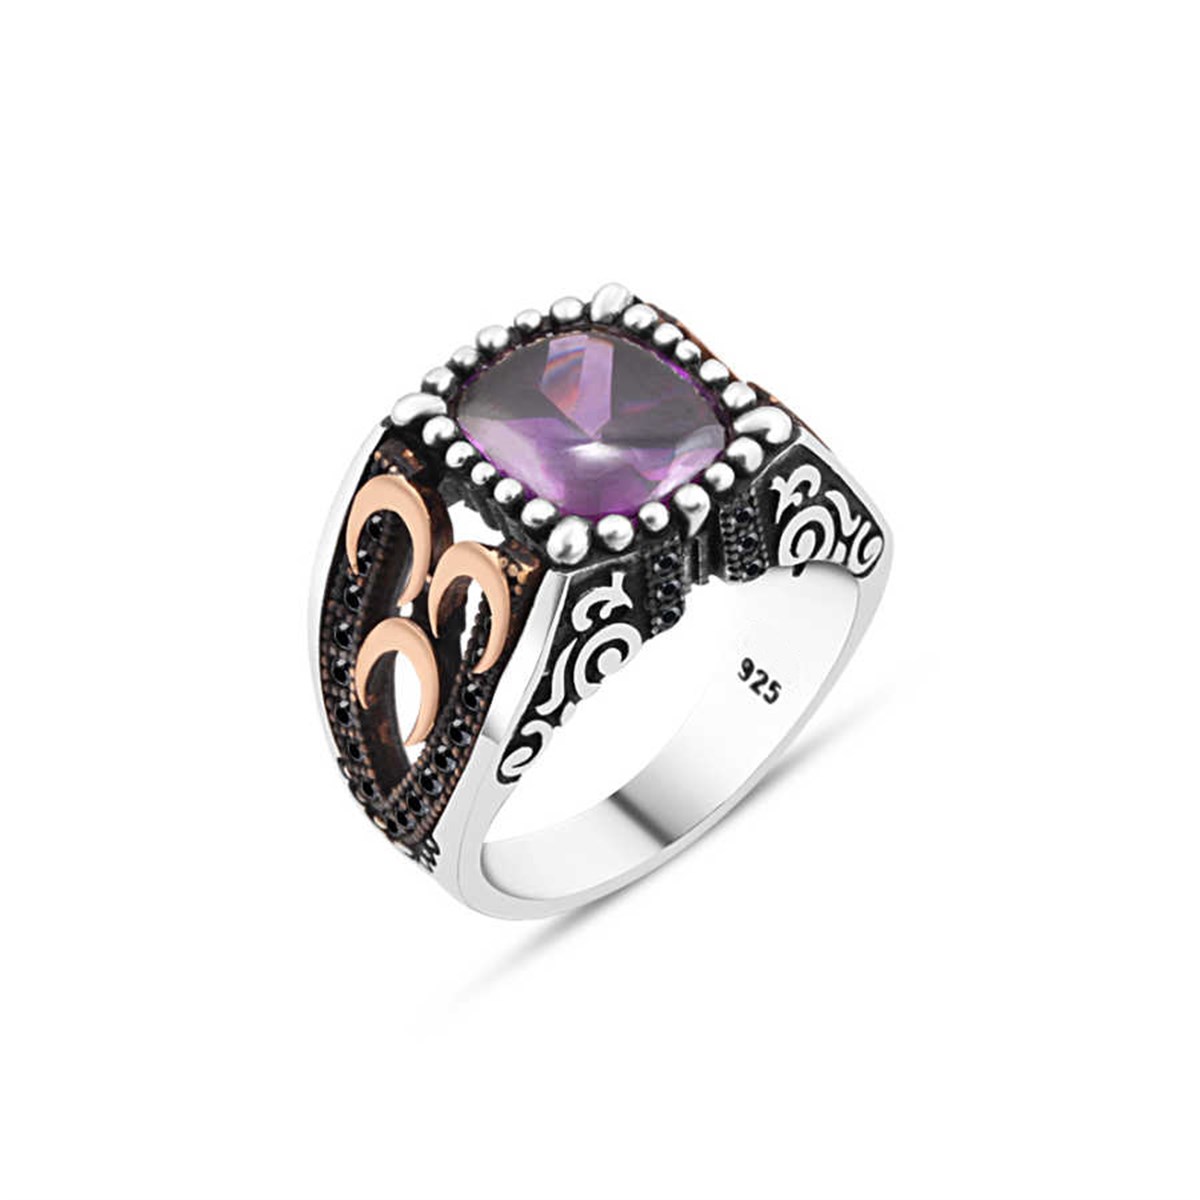 Three Crescent Silver Men's Ring with Amethyst Stone